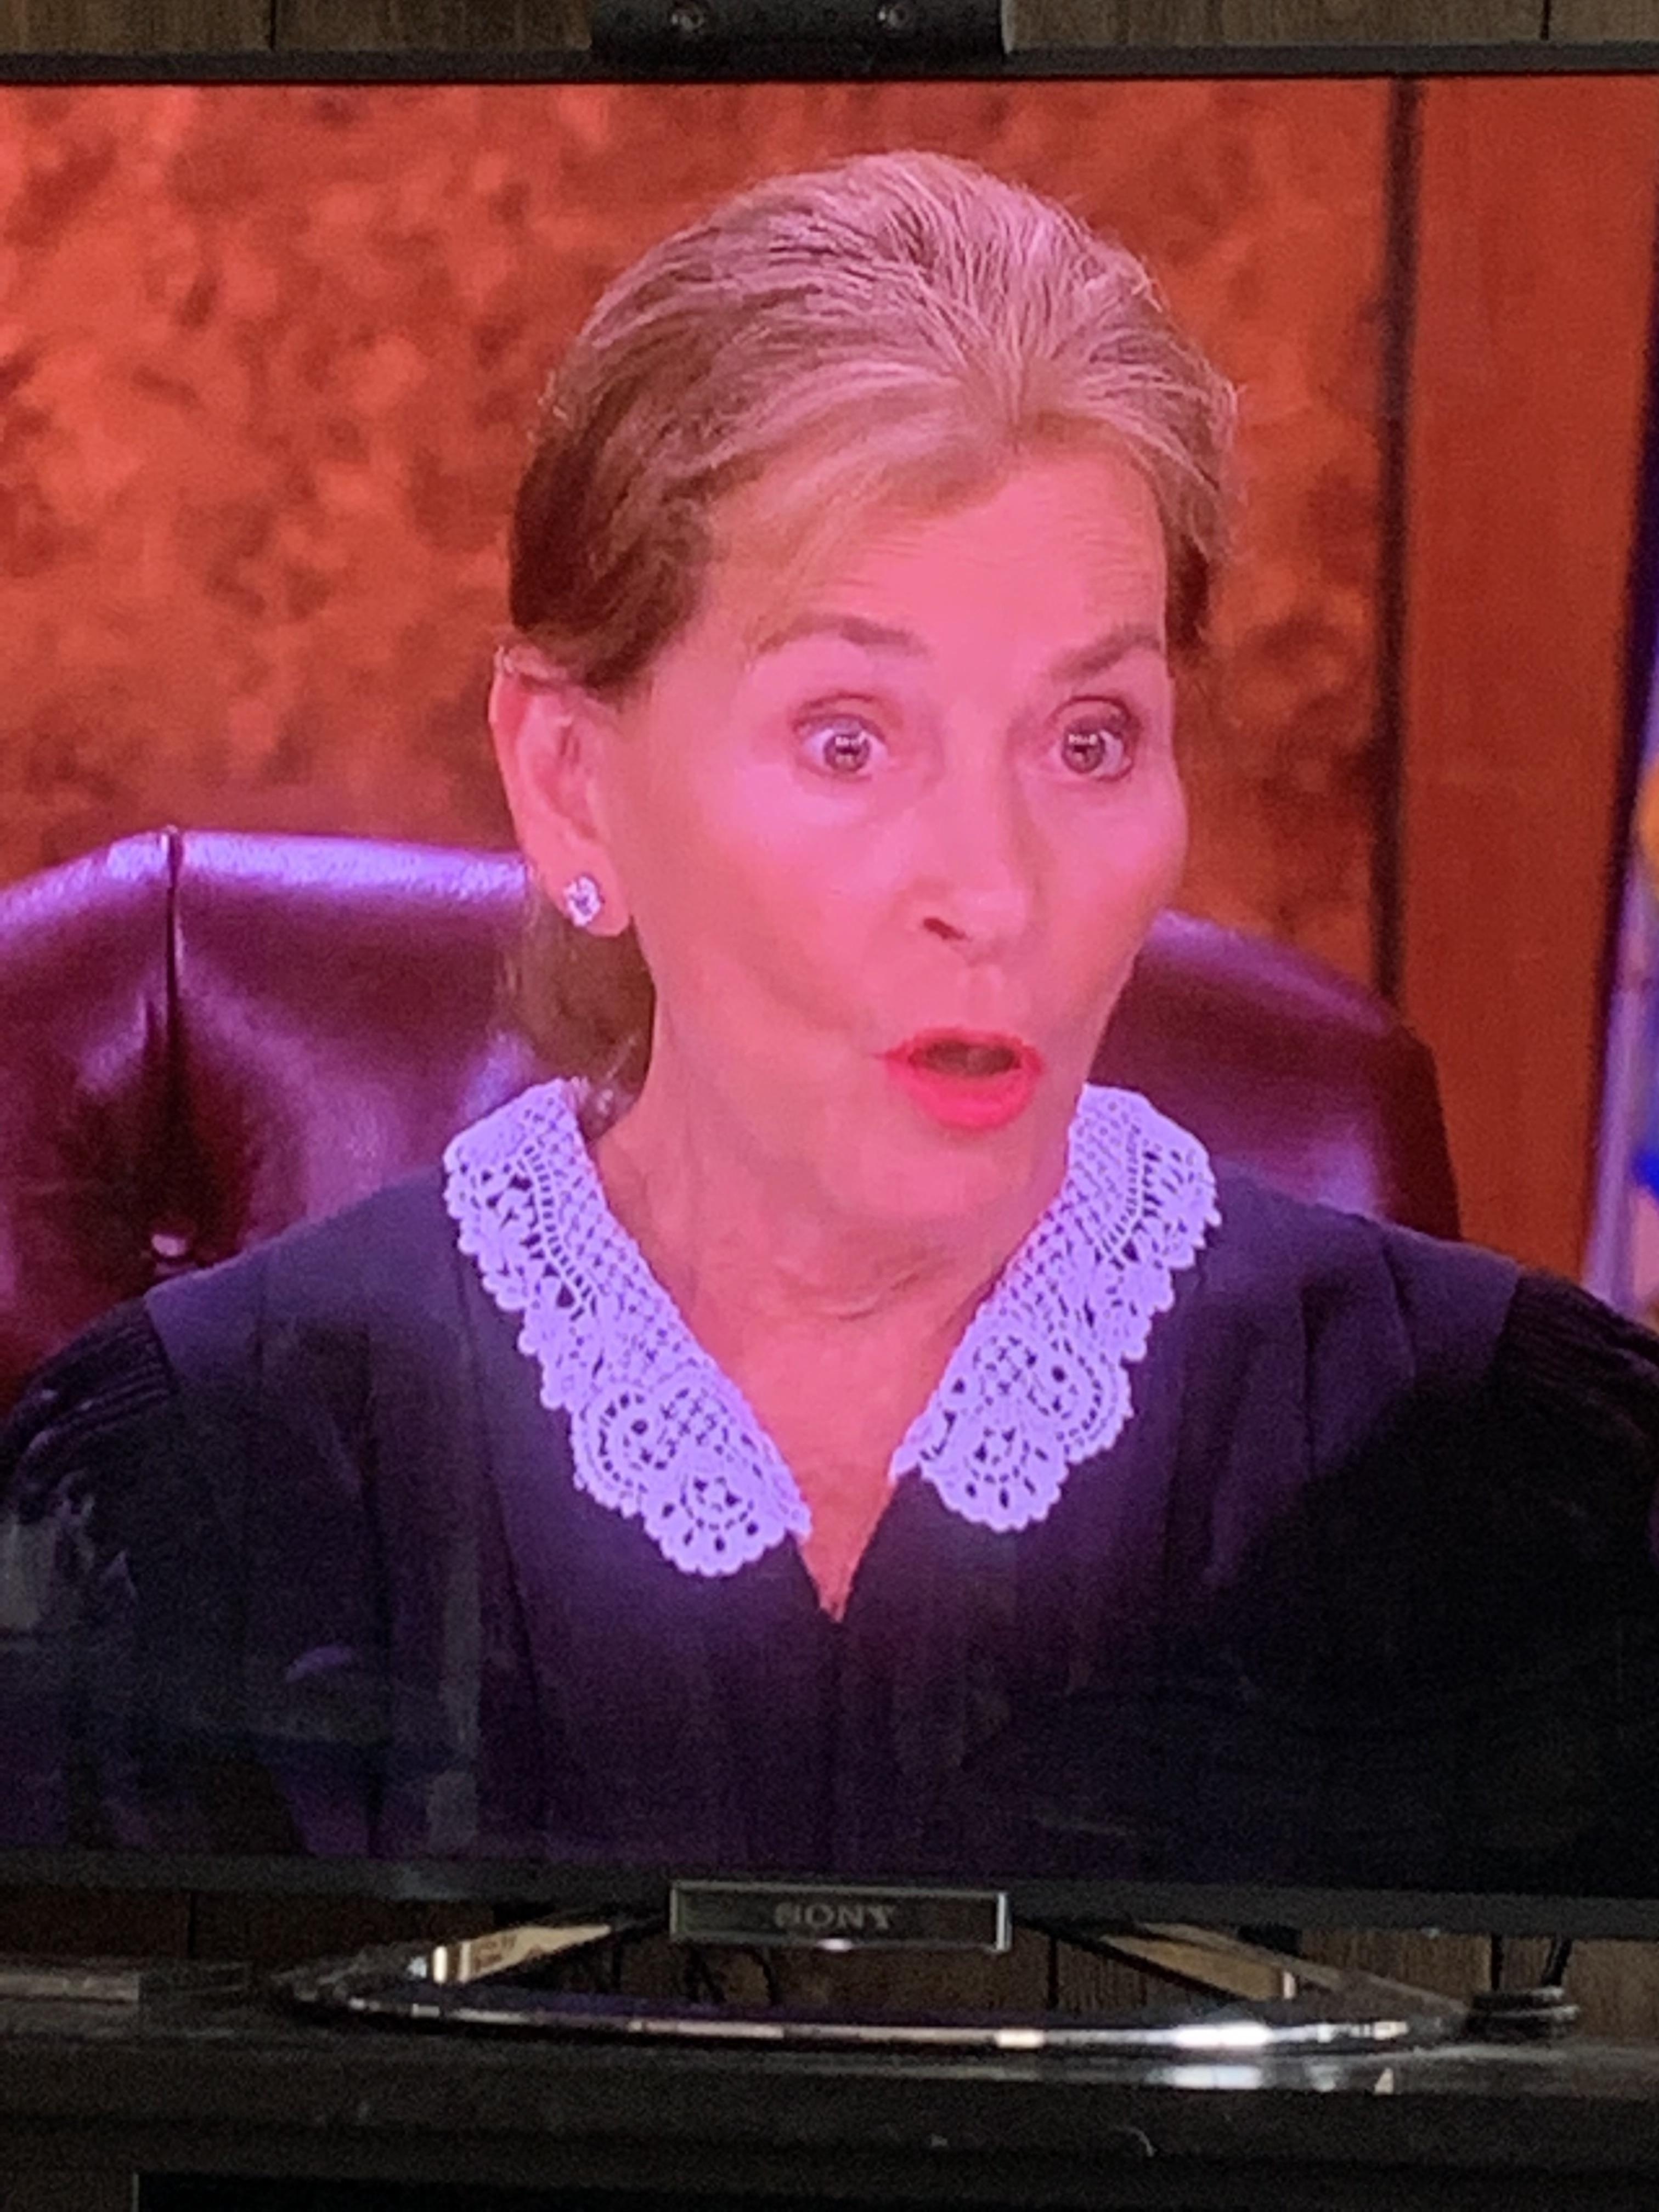 Judge Judy Laying Down The Law With A New Young Hairstyle within New Judge Judy Hair Style